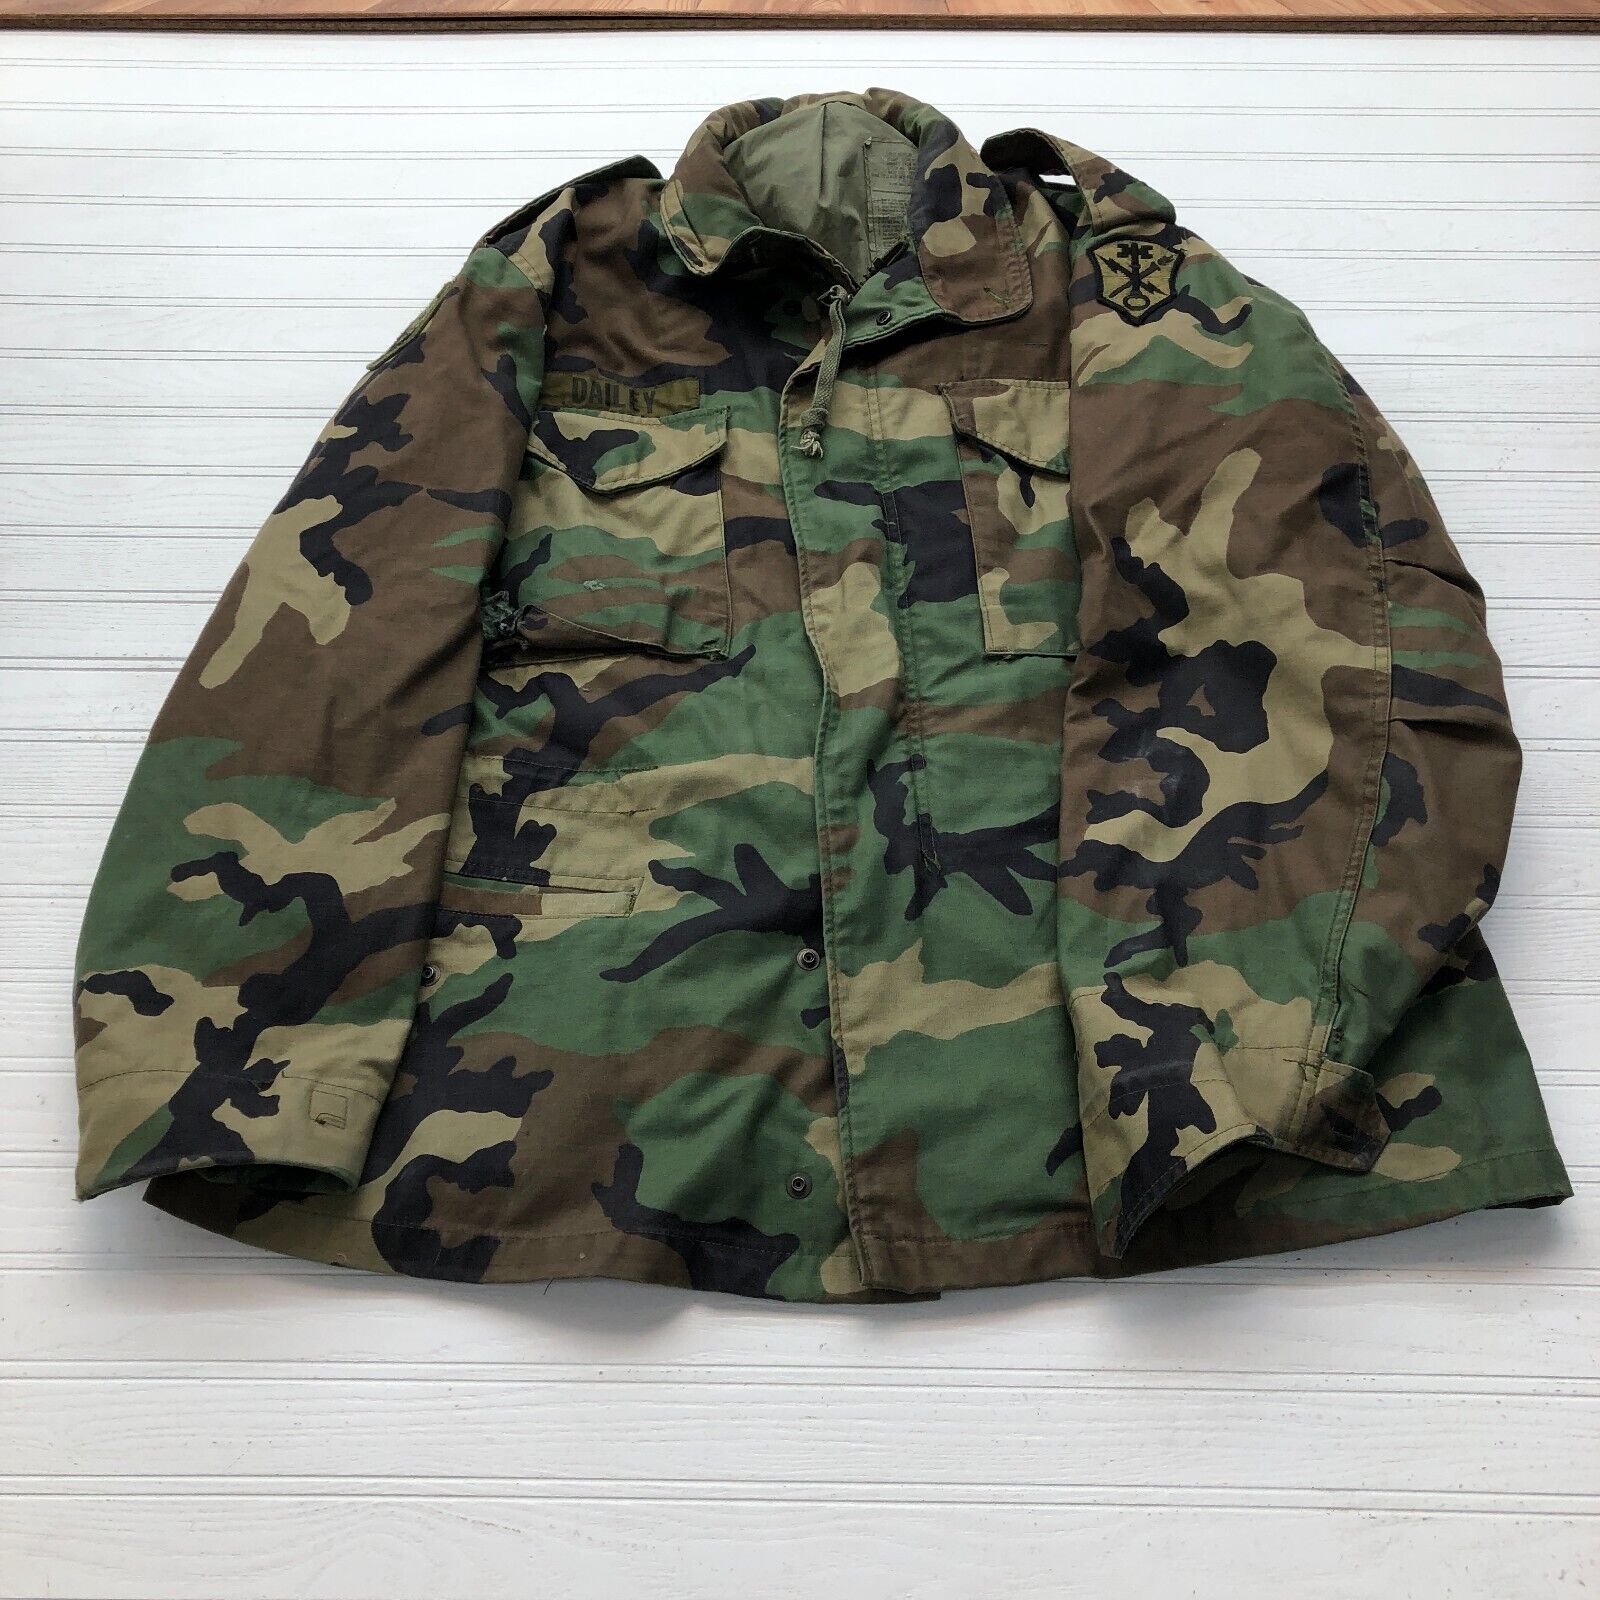 Camouflage Heavy Hunting Military Coat With Zipped Hood Mens Size Large